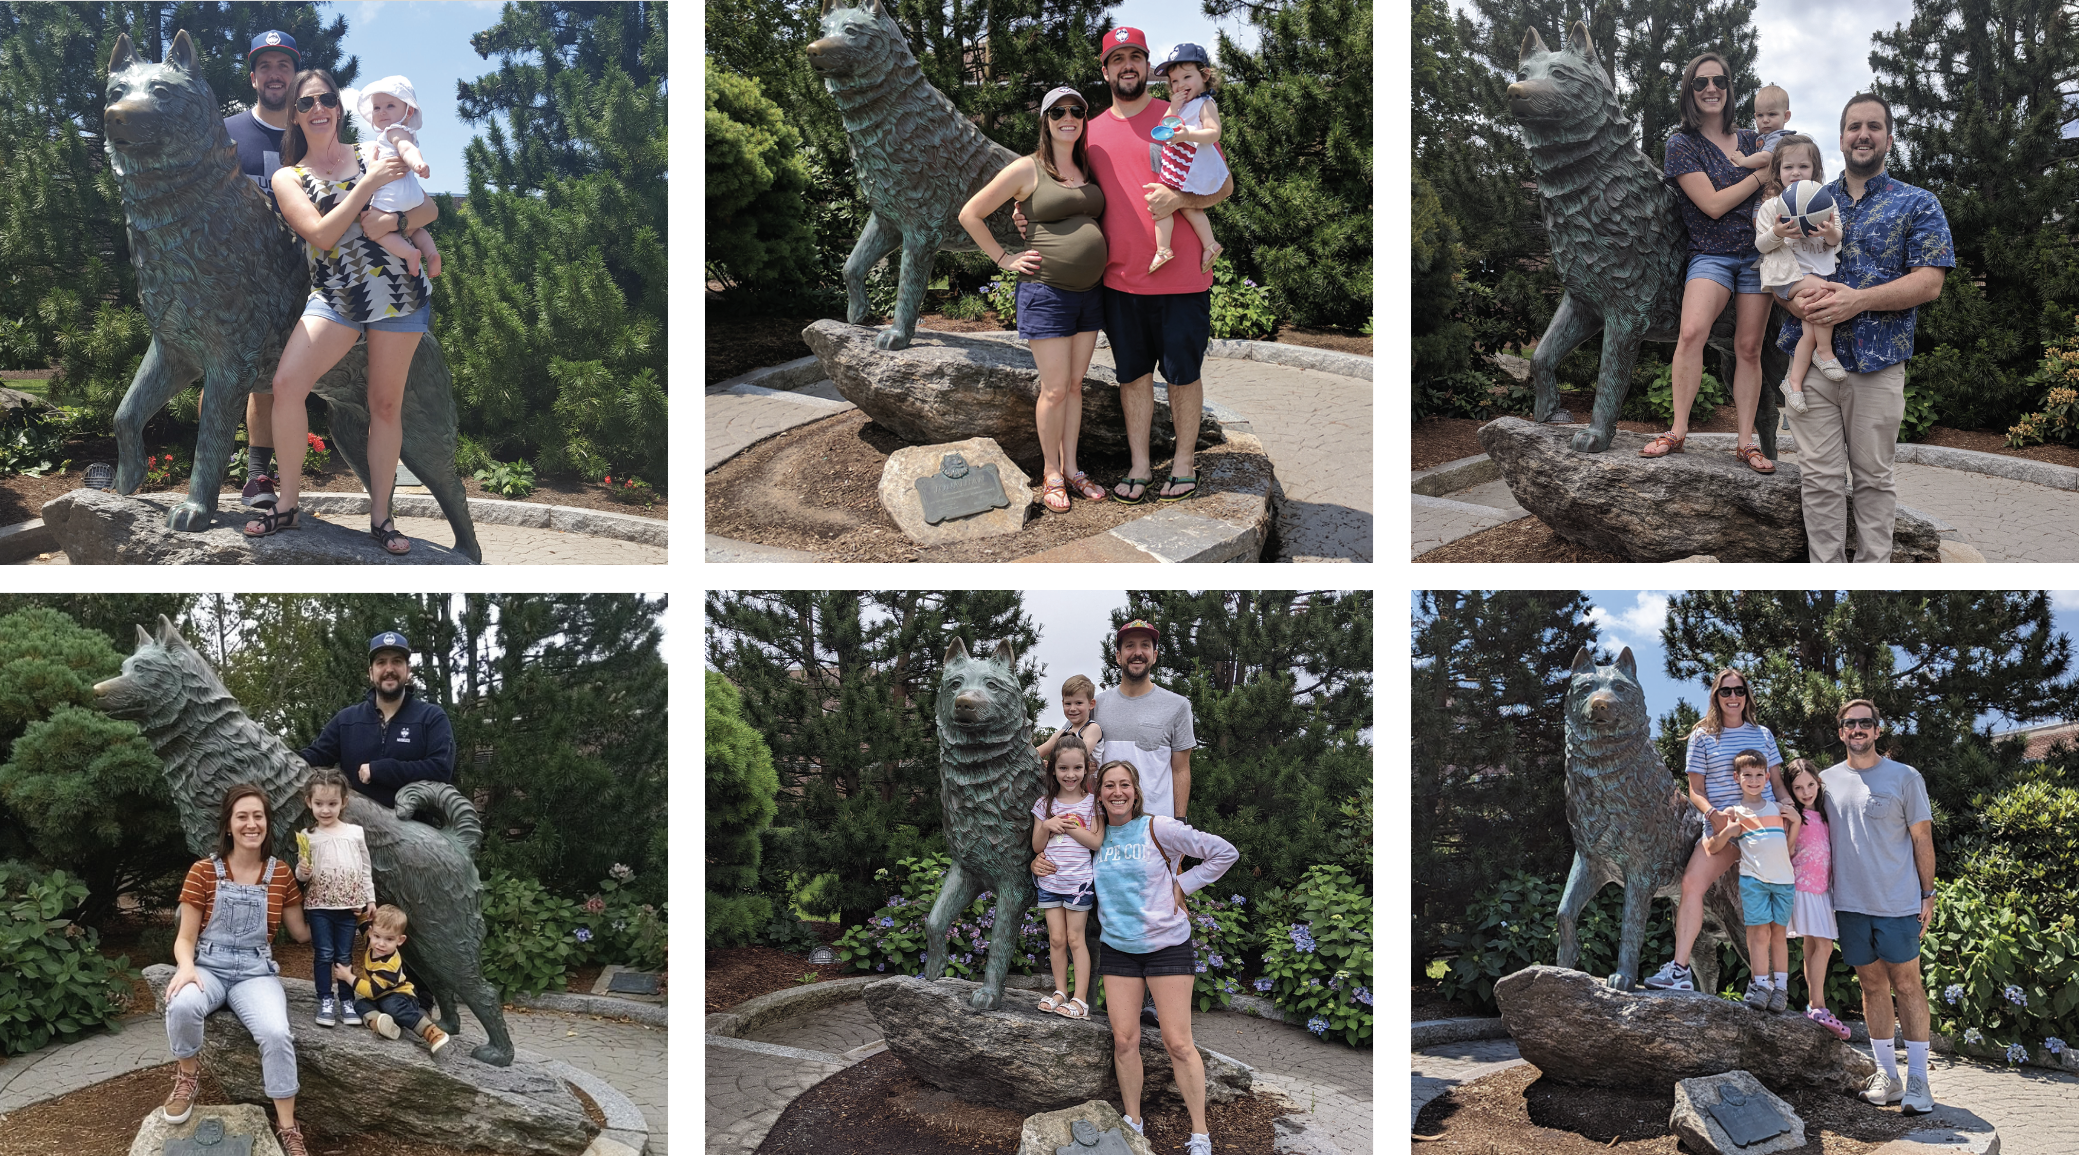 Kayla Murphy and husband of Austin, Texas, visit UConn's Jonathan Statue at Storrs, Connecticut, with their children, Charlie and Connor over the years.